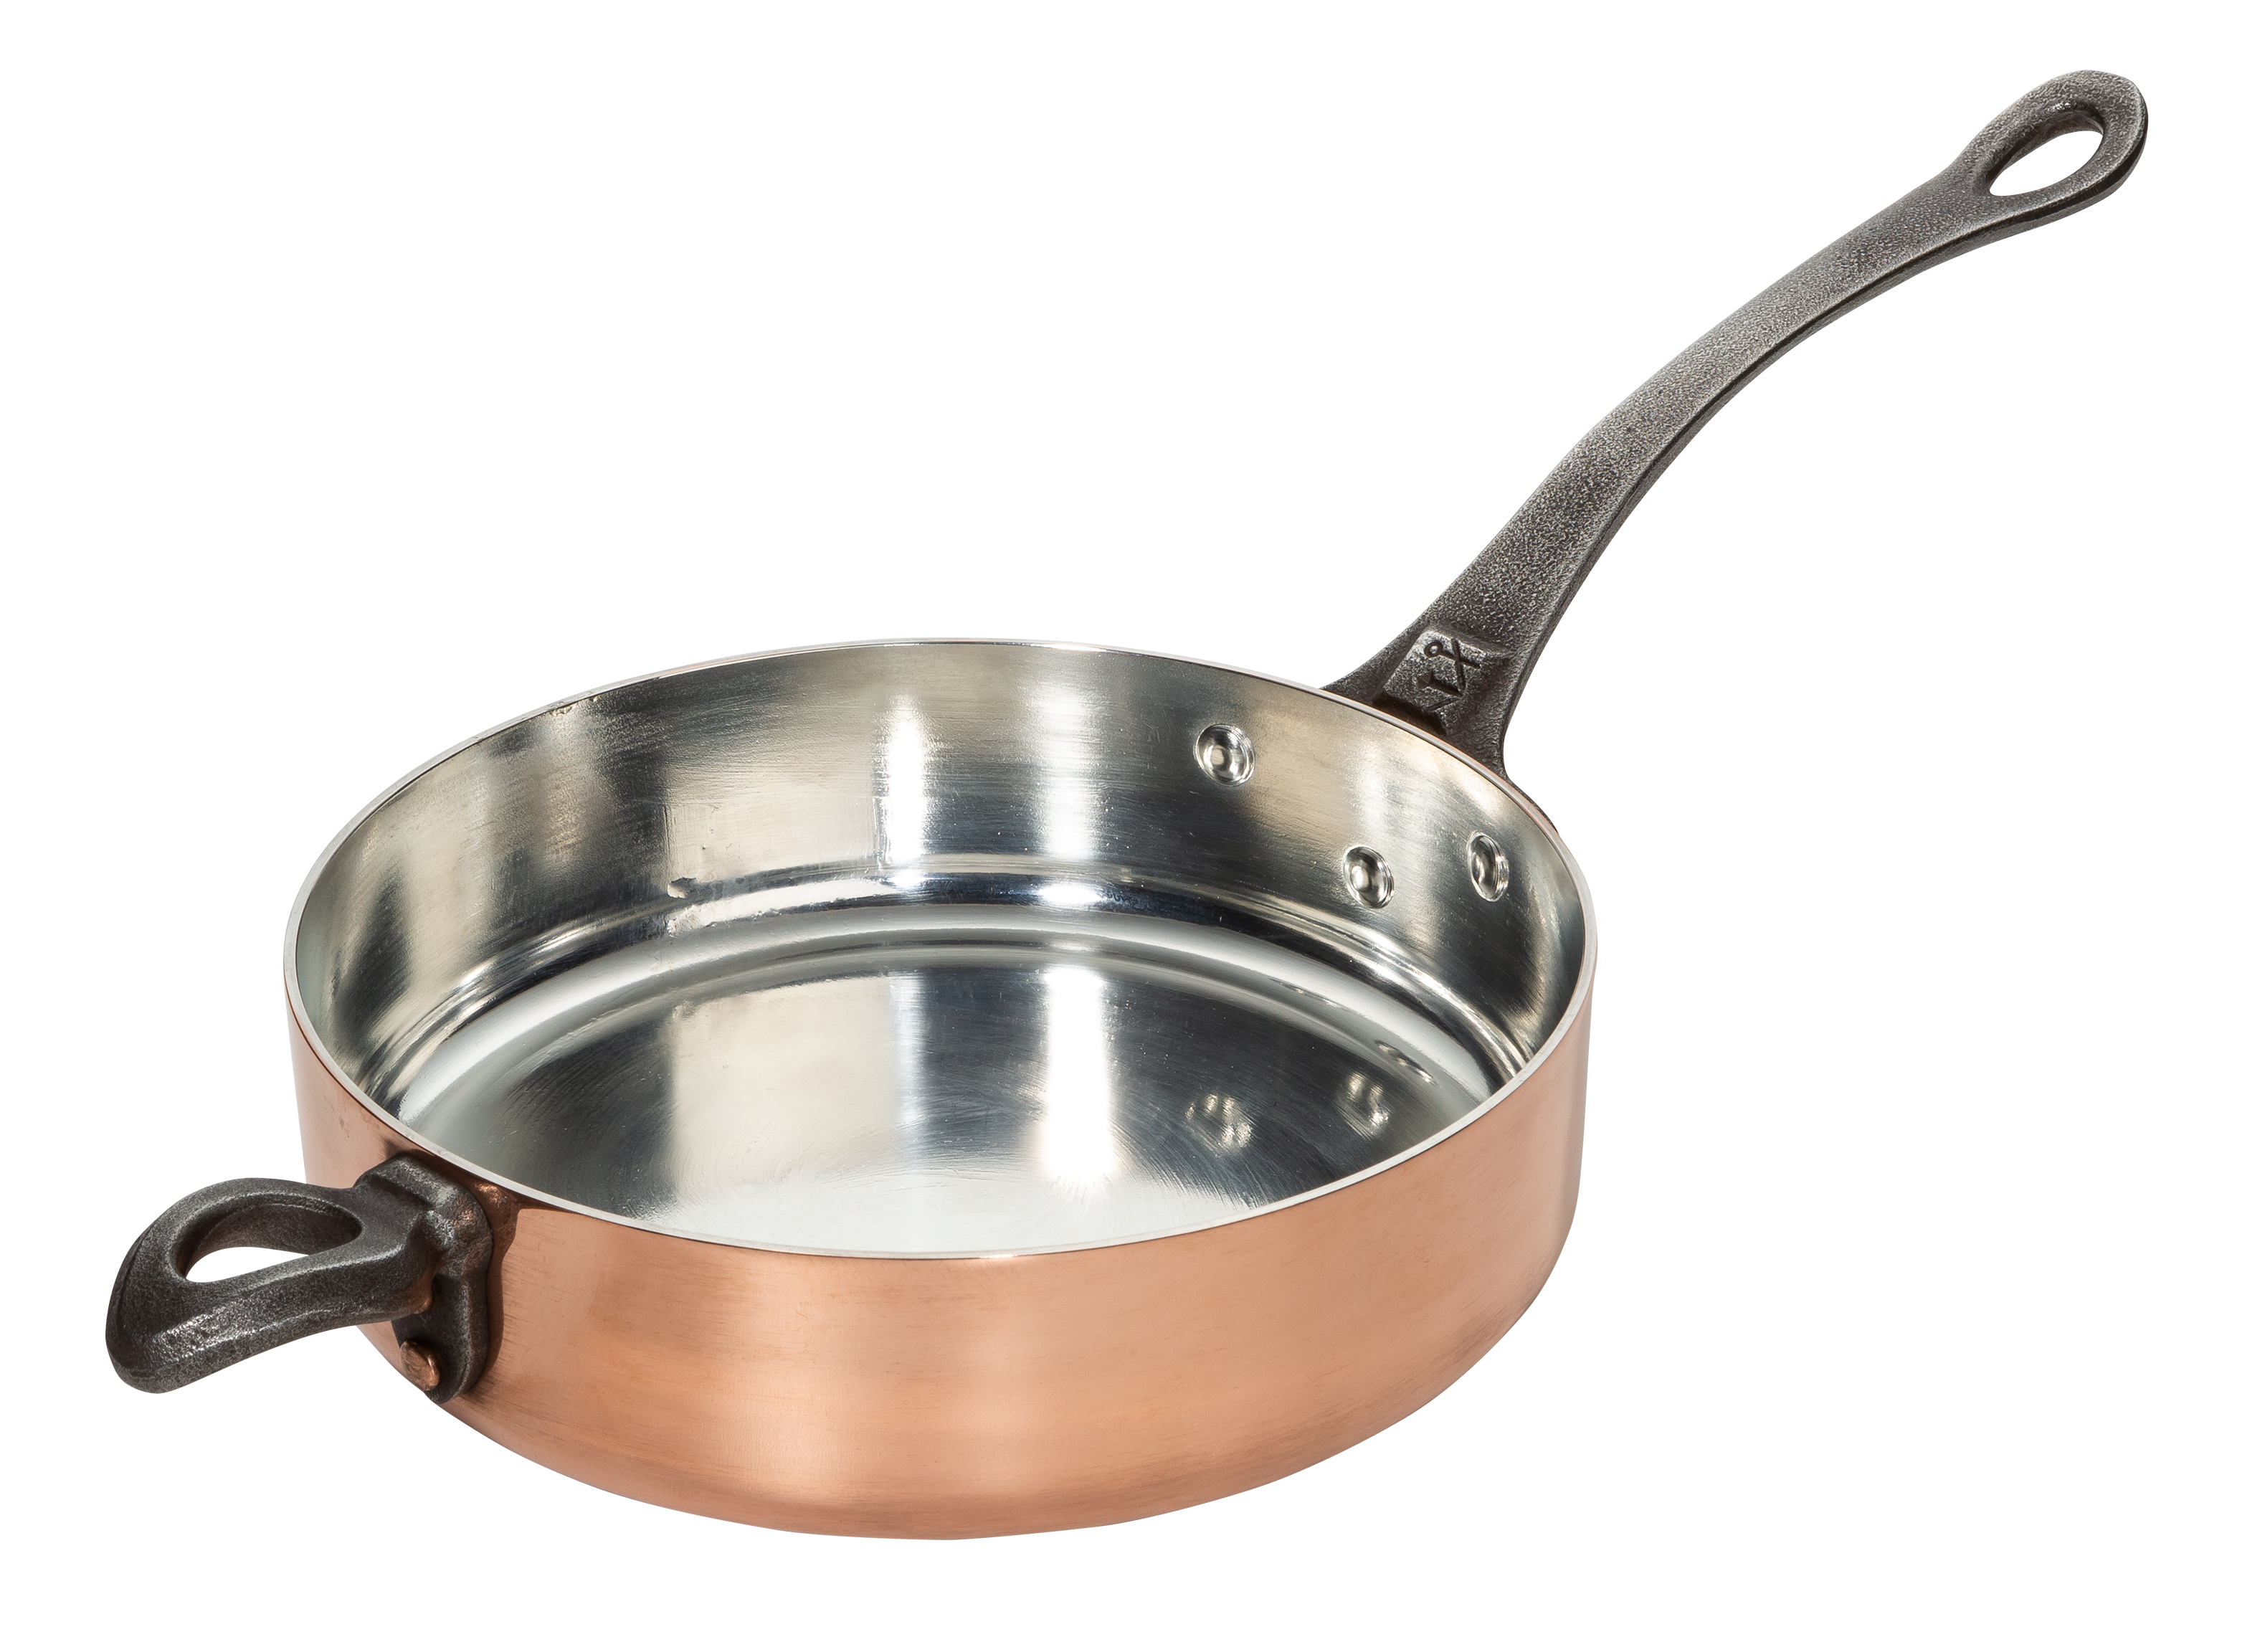 https://crdms.images.consumerreports.org/prod/products/cr/models/398586-frying-pans-other-brooklyn-copper-saut%C3%A9-10005767.png